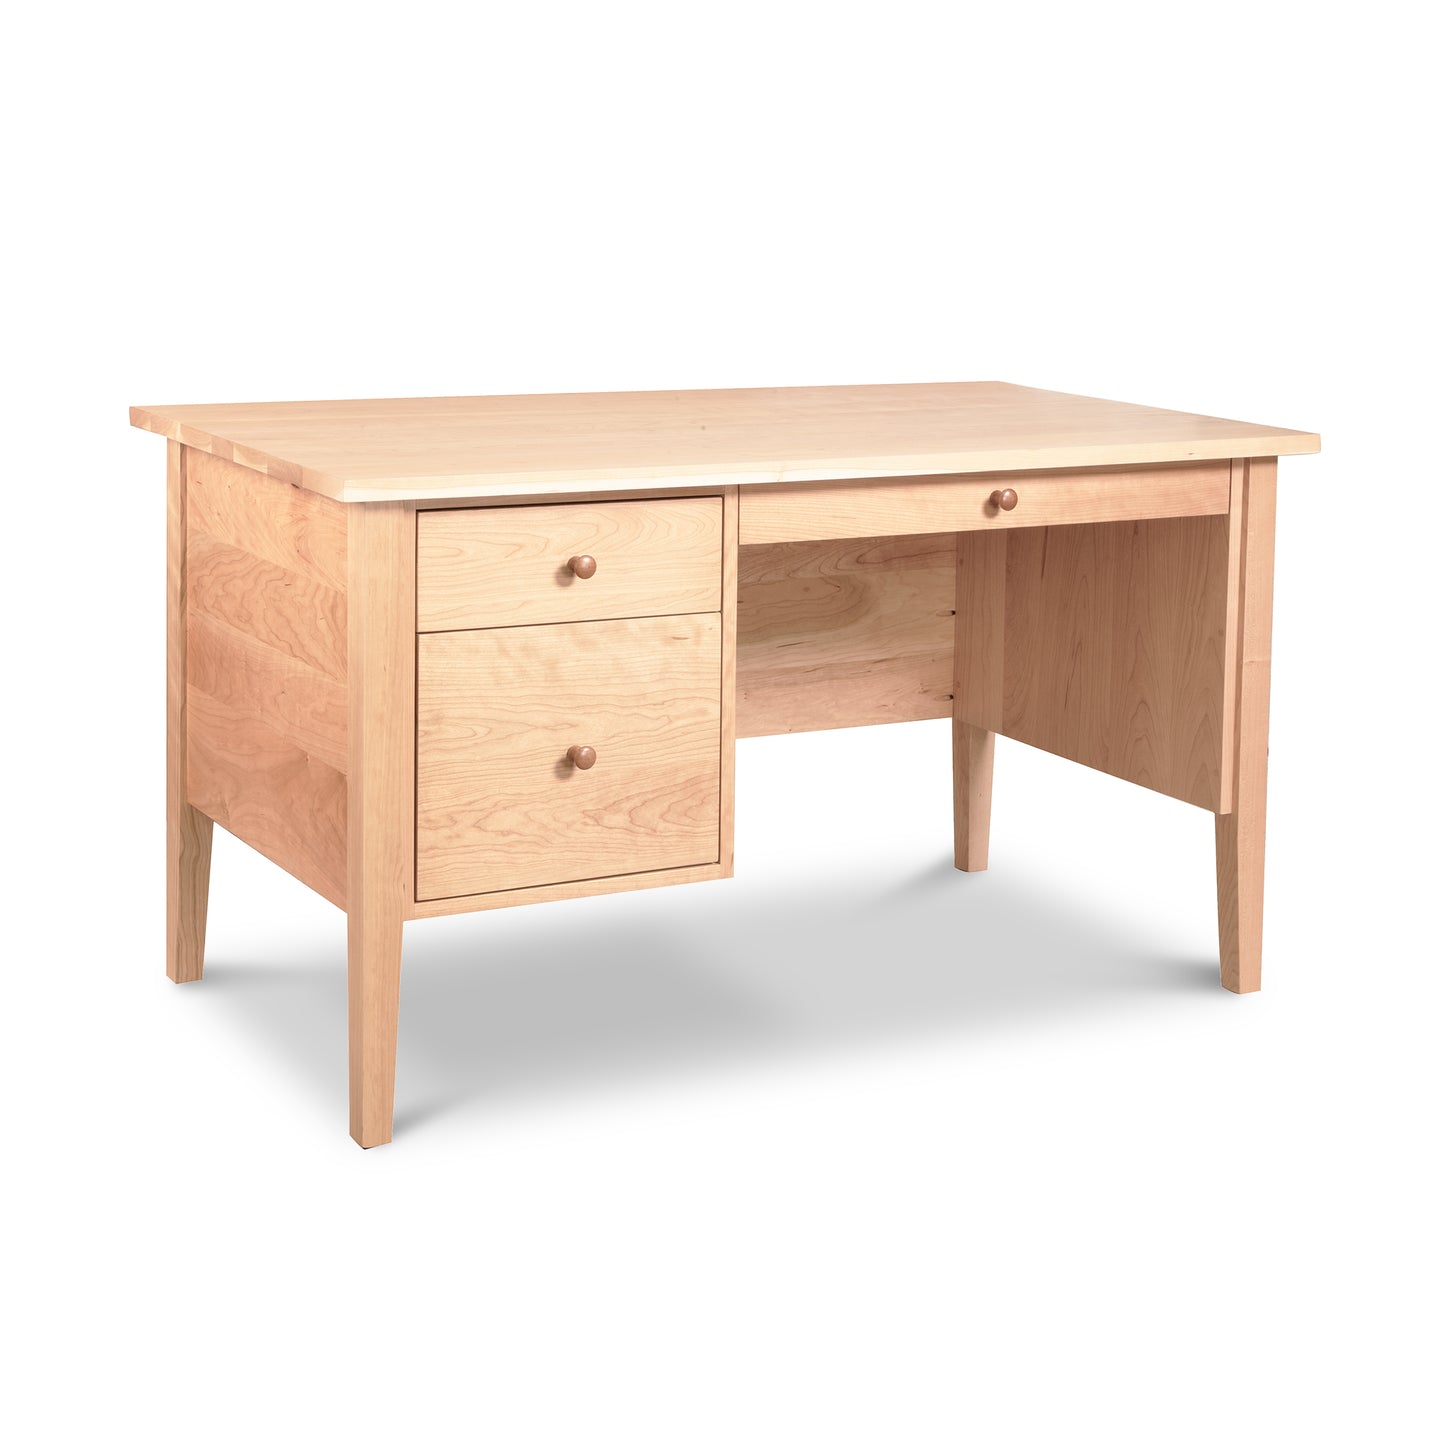 A small Wood Executive Desk made by Lyndon Furniture with two drawers for storage.